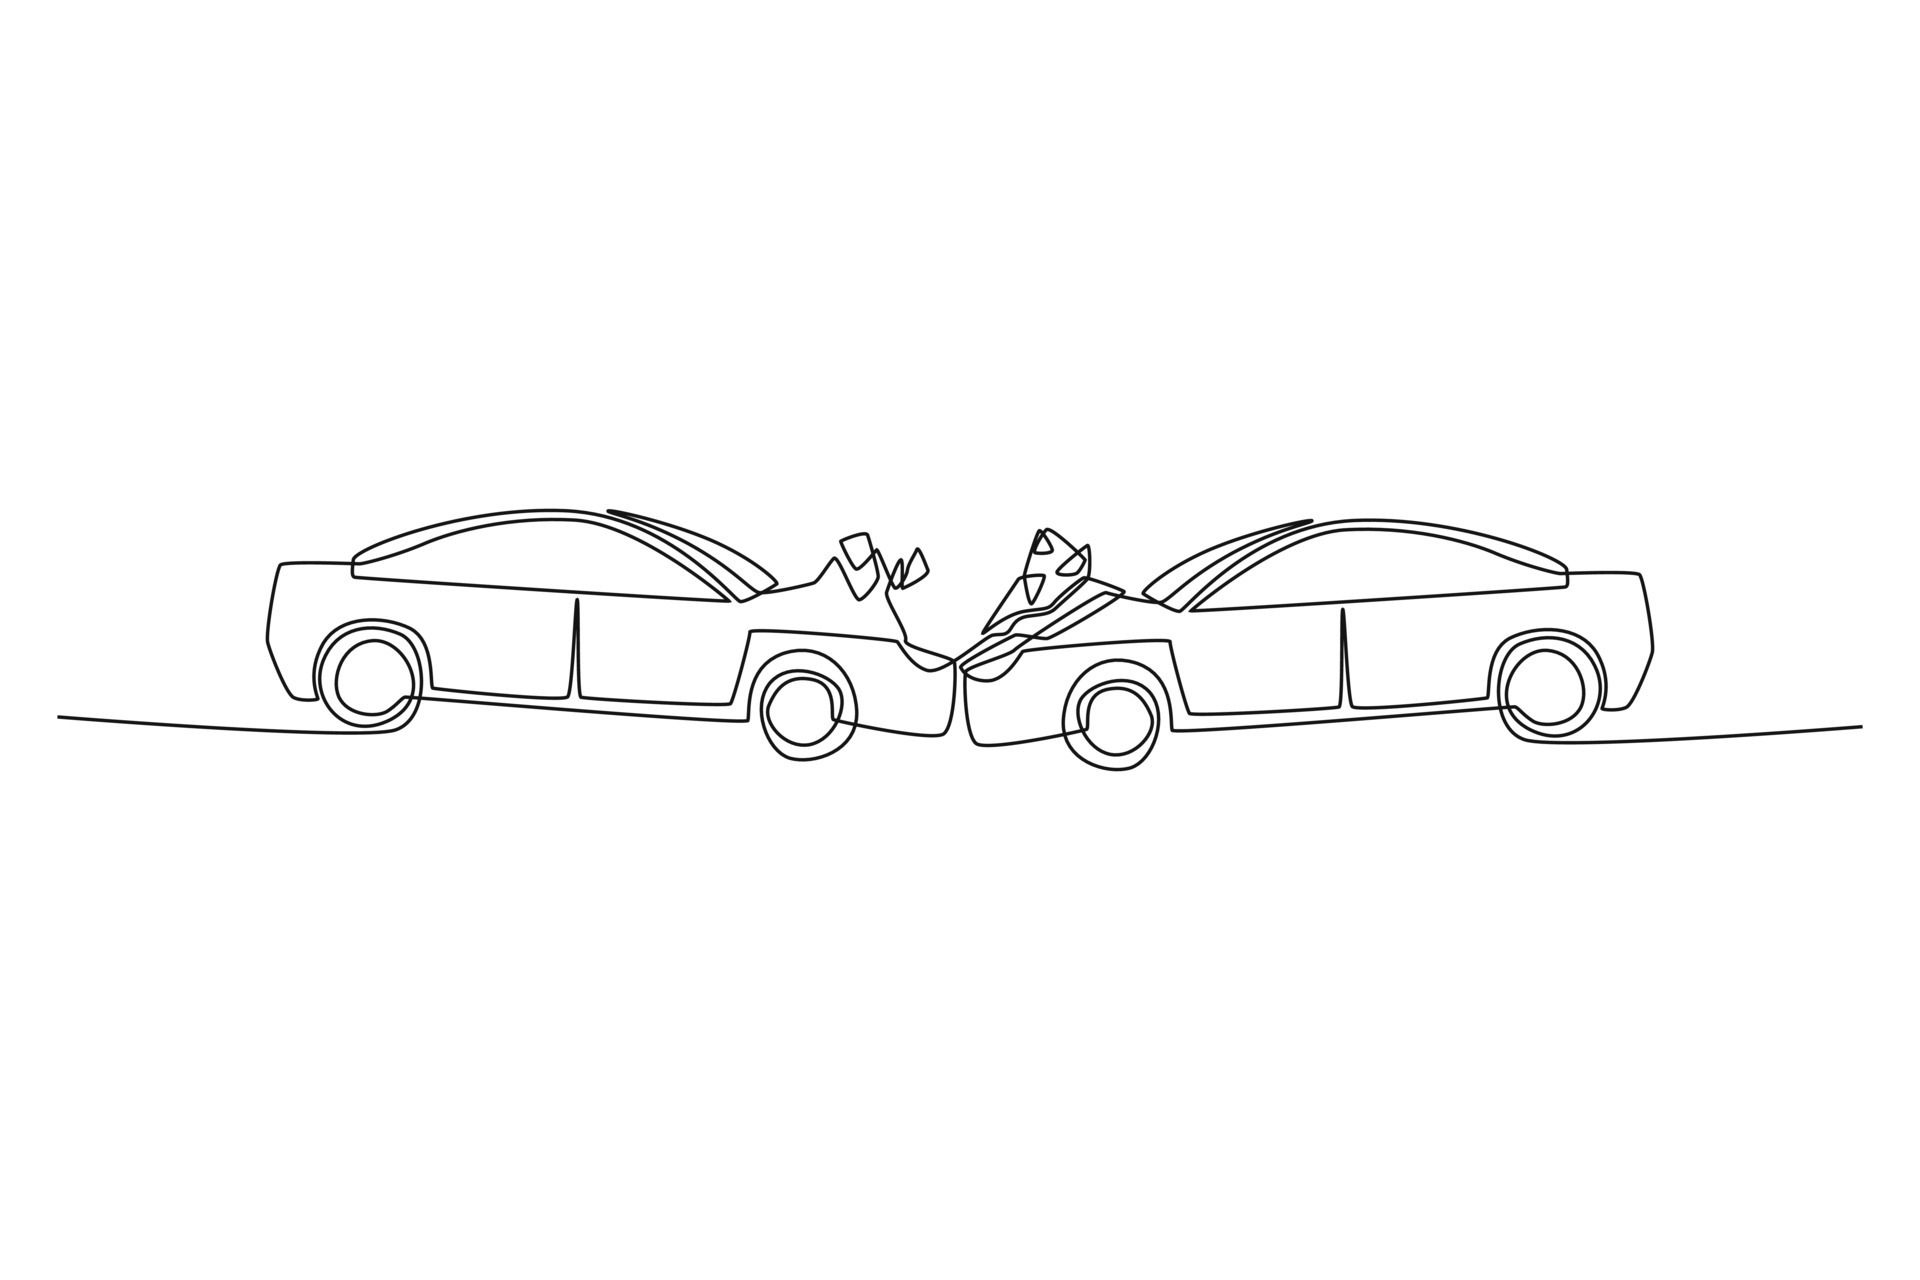 Accident of Two Cars Sketch Stock Vector  Illustration of doodle chalk  40079901